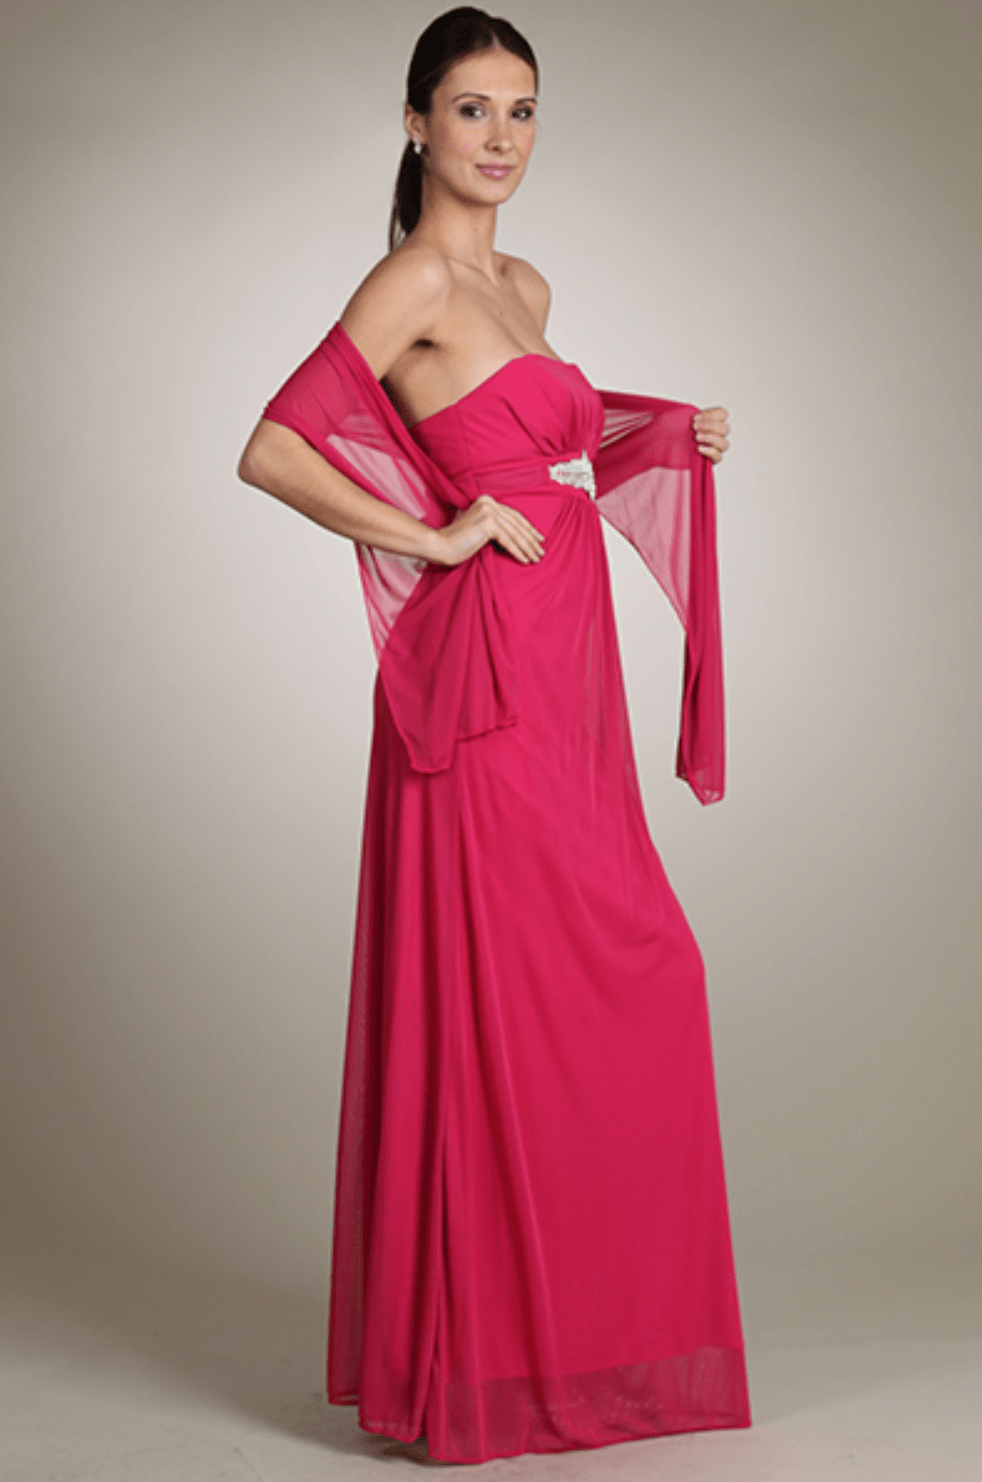 Stretch Jersey & Chiffon Strapless Long Dress by Fiesta | 8 Colors - NORMA REED